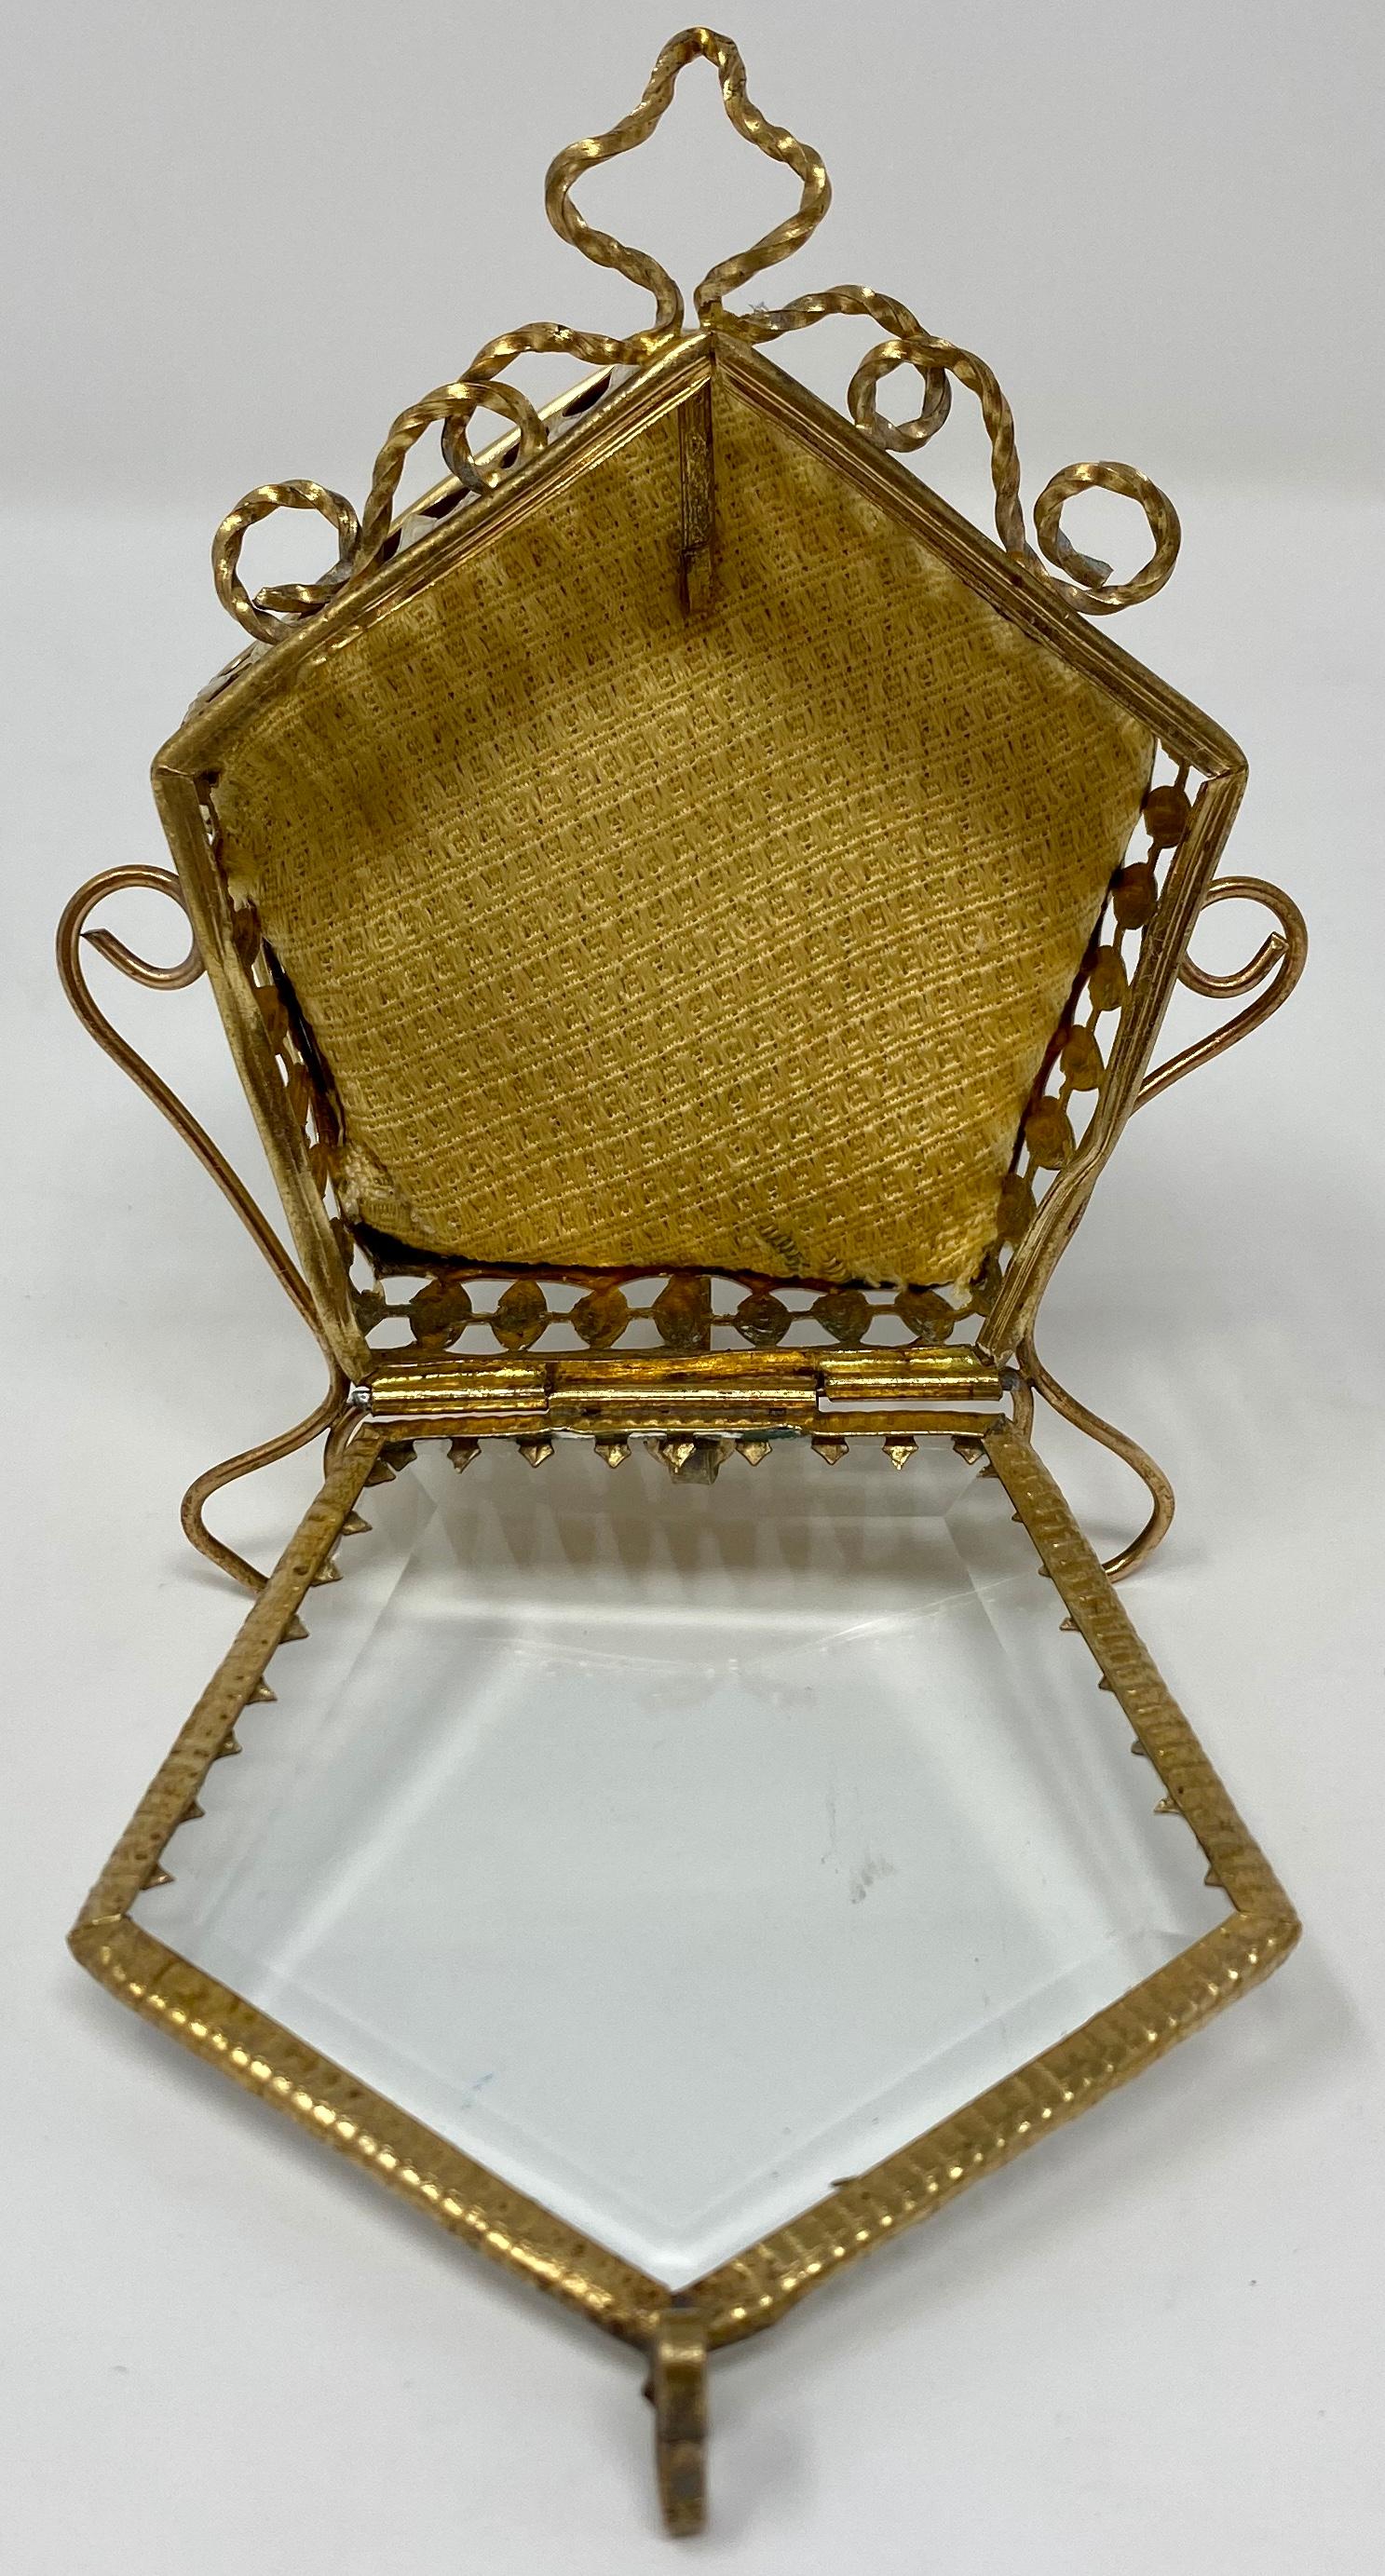 Antique French Vitrine Watch Holder Brass Ormolu with Beveled Glass, circa 1900 For Sale 1